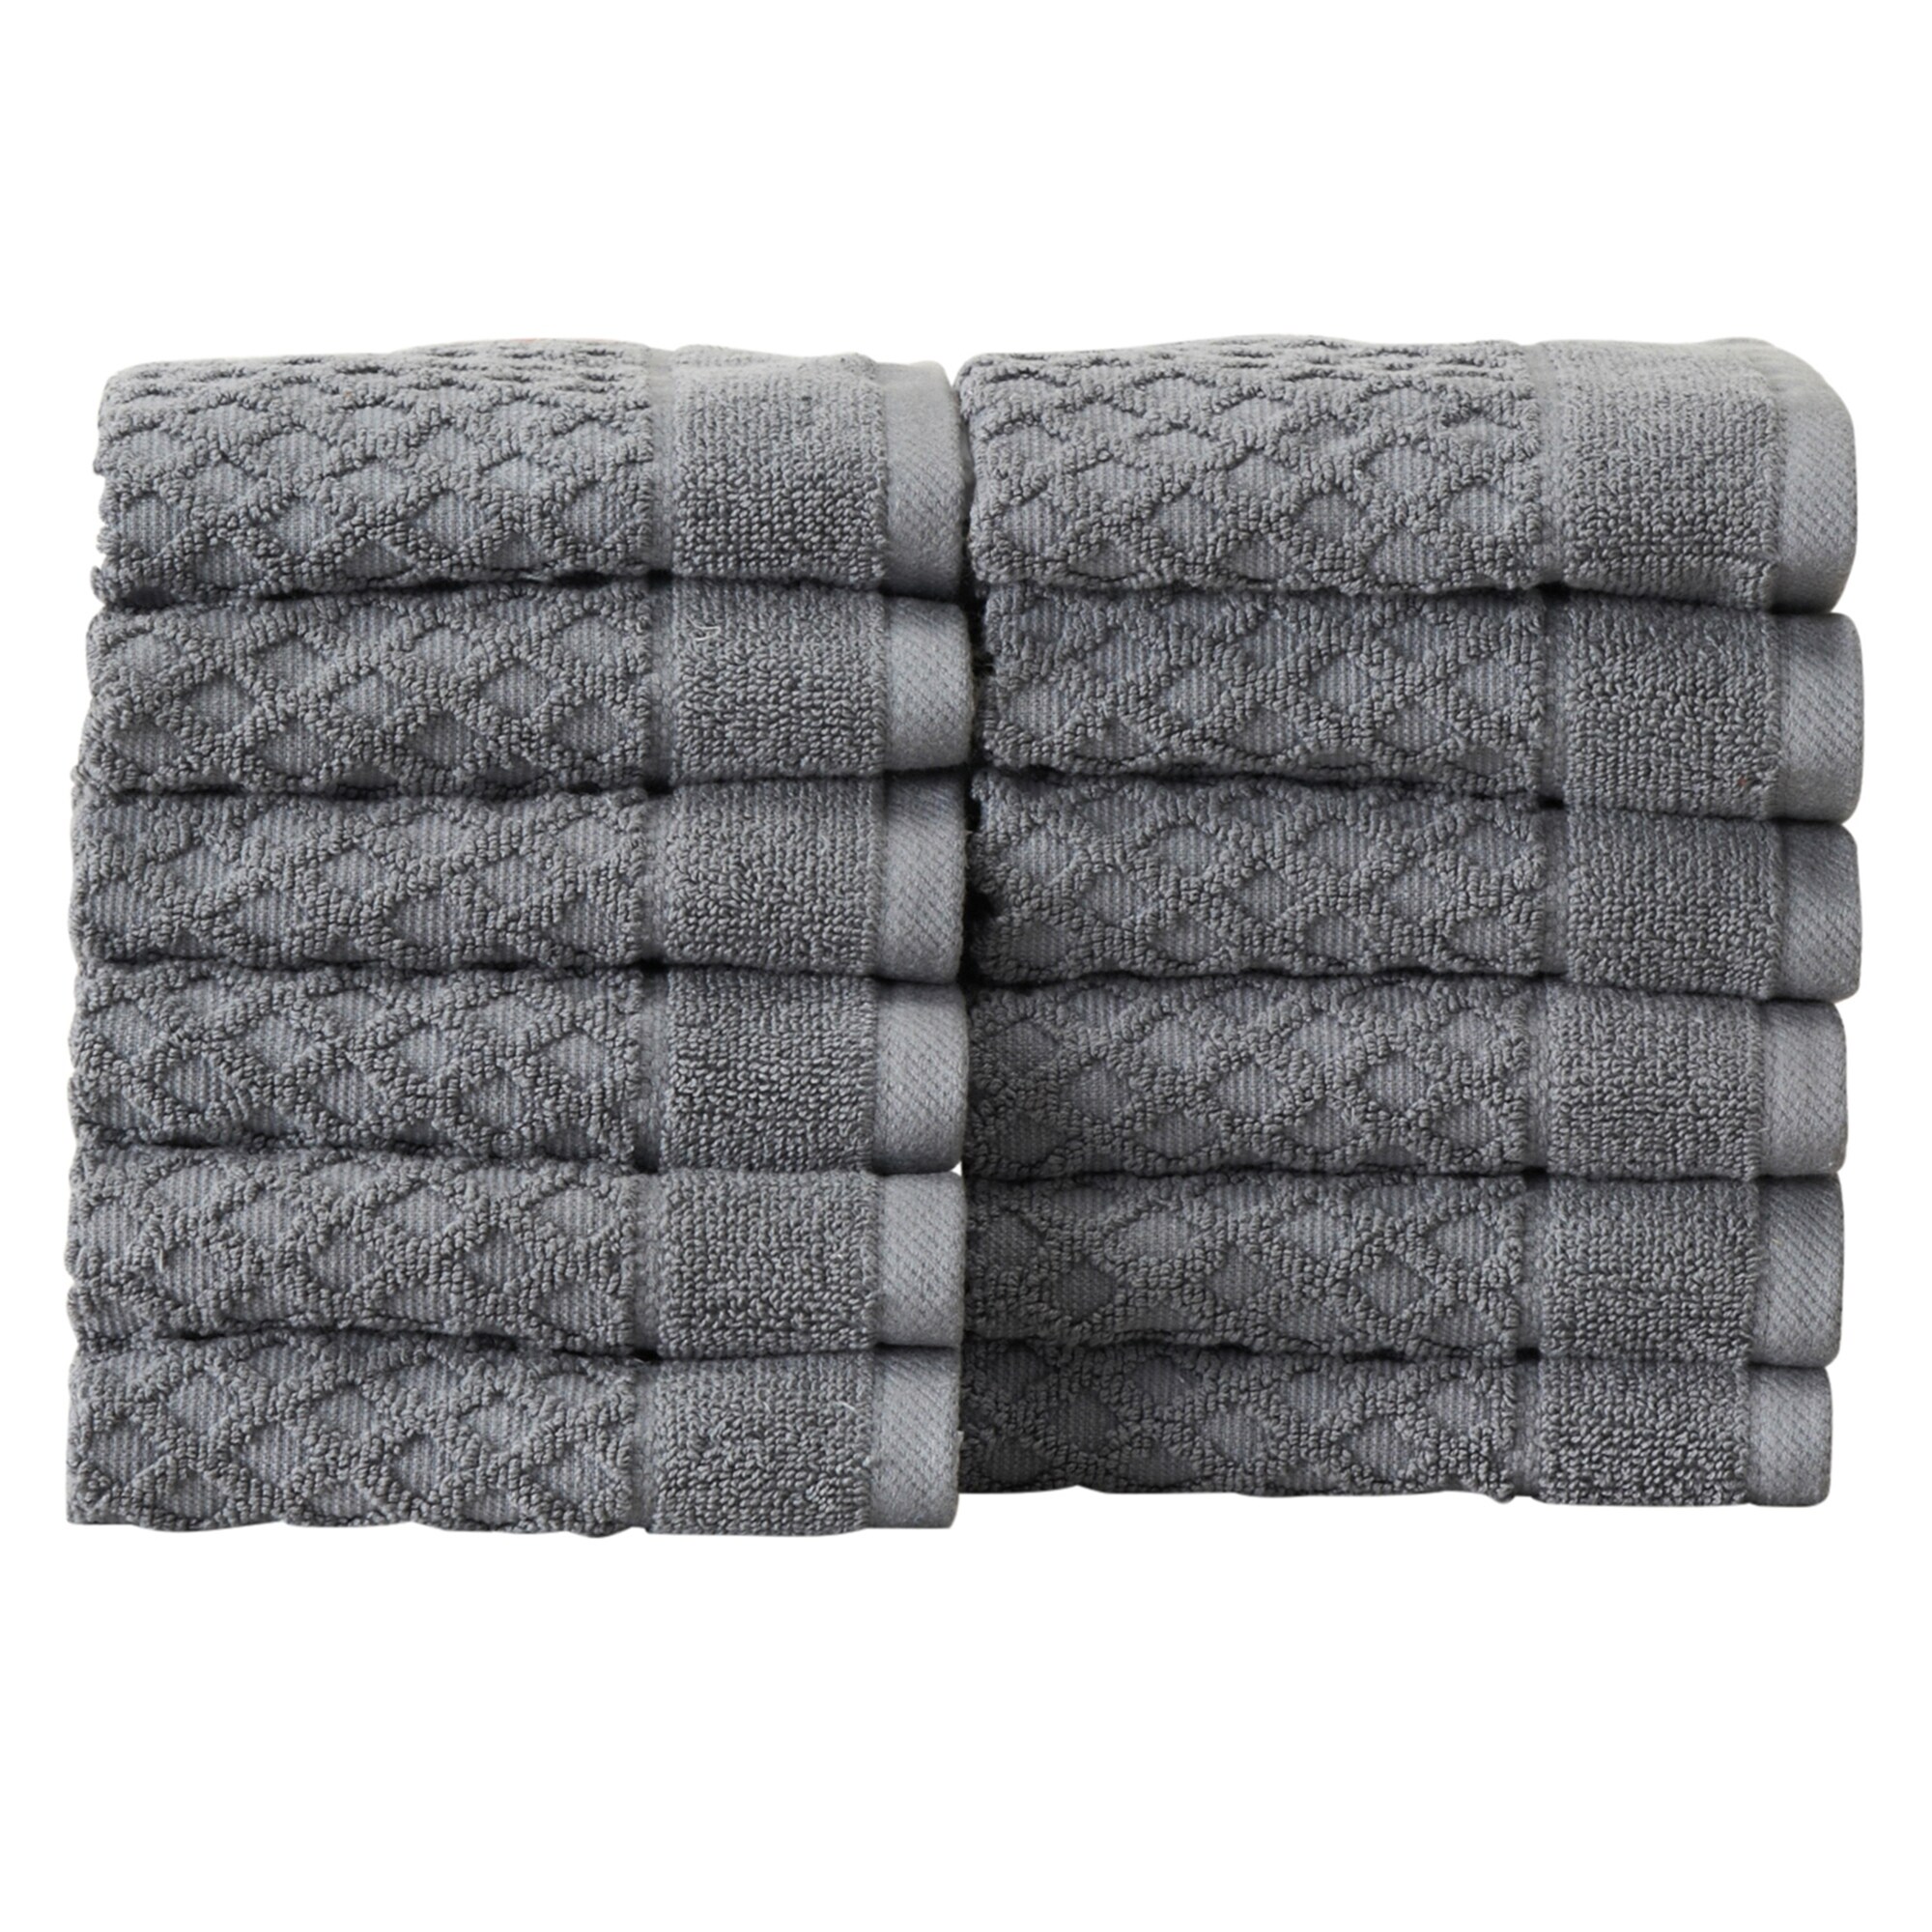 https://ak1.ostkcdn.com/images/products/is/images/direct/50f156aa647c880018db8d99255d710c26c63820/Great-Bay-Home-Cotton-Diamond-Textured-Towel-Set.jpg